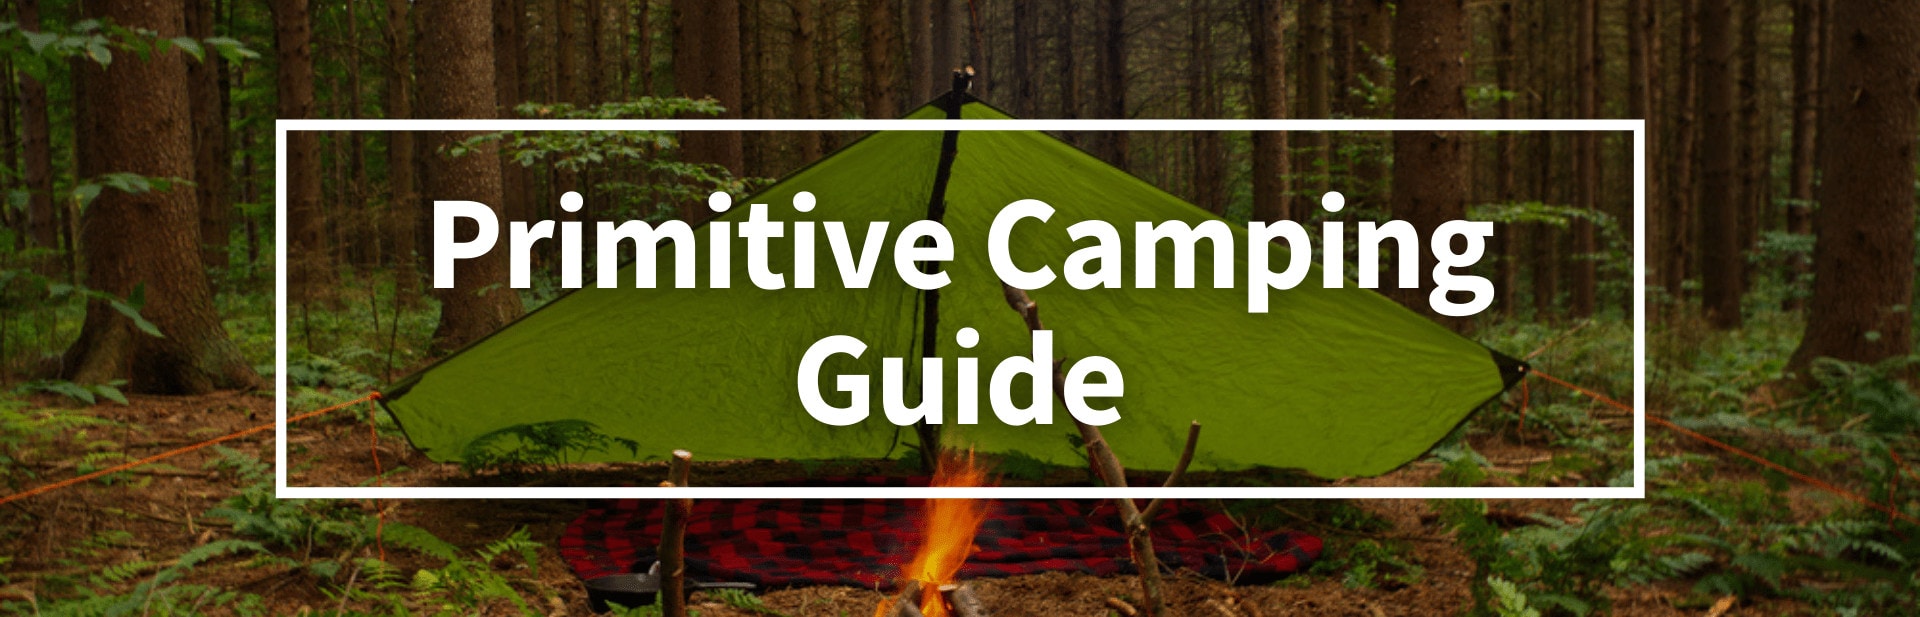 Primitive Camping Guide: Camp Like Our Ancestors Once Did